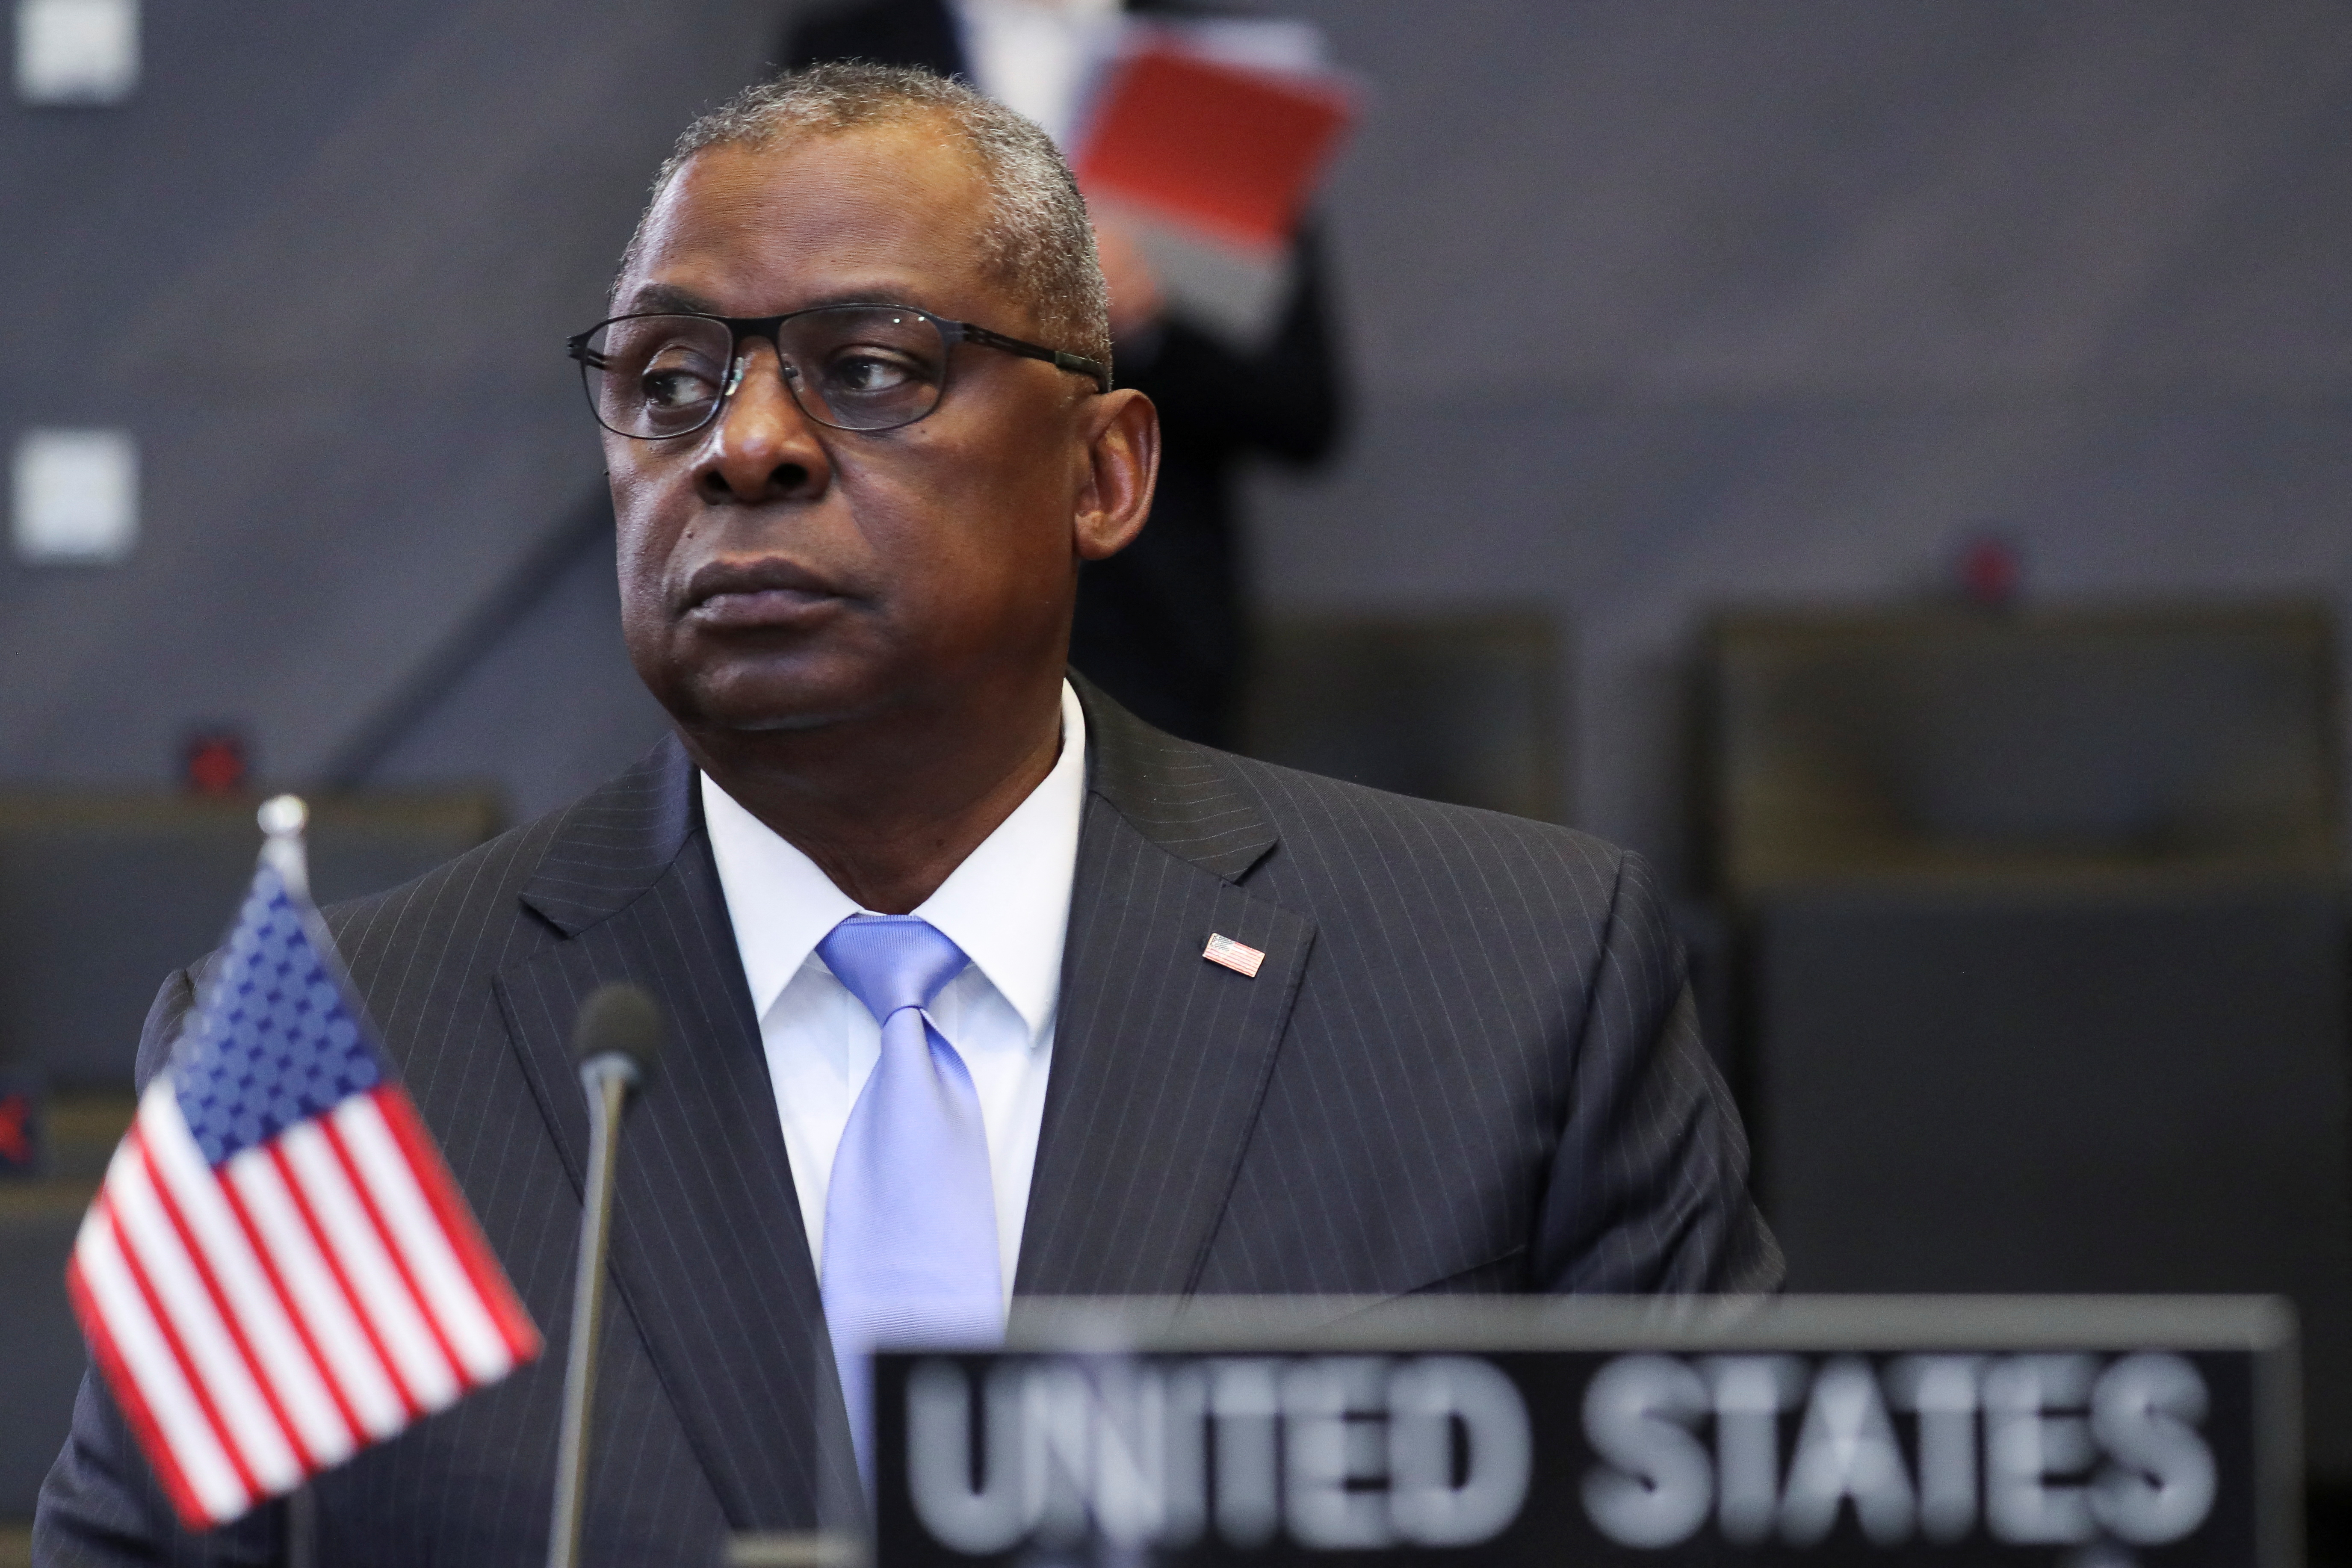 U.S. Defence Secretary Lloyd Austin attends a NATO Defence Ministers meeting at the Alliance headquarters in Brussels, Belgium, October 21, 2021. REUTERS/Pascal Rossignol